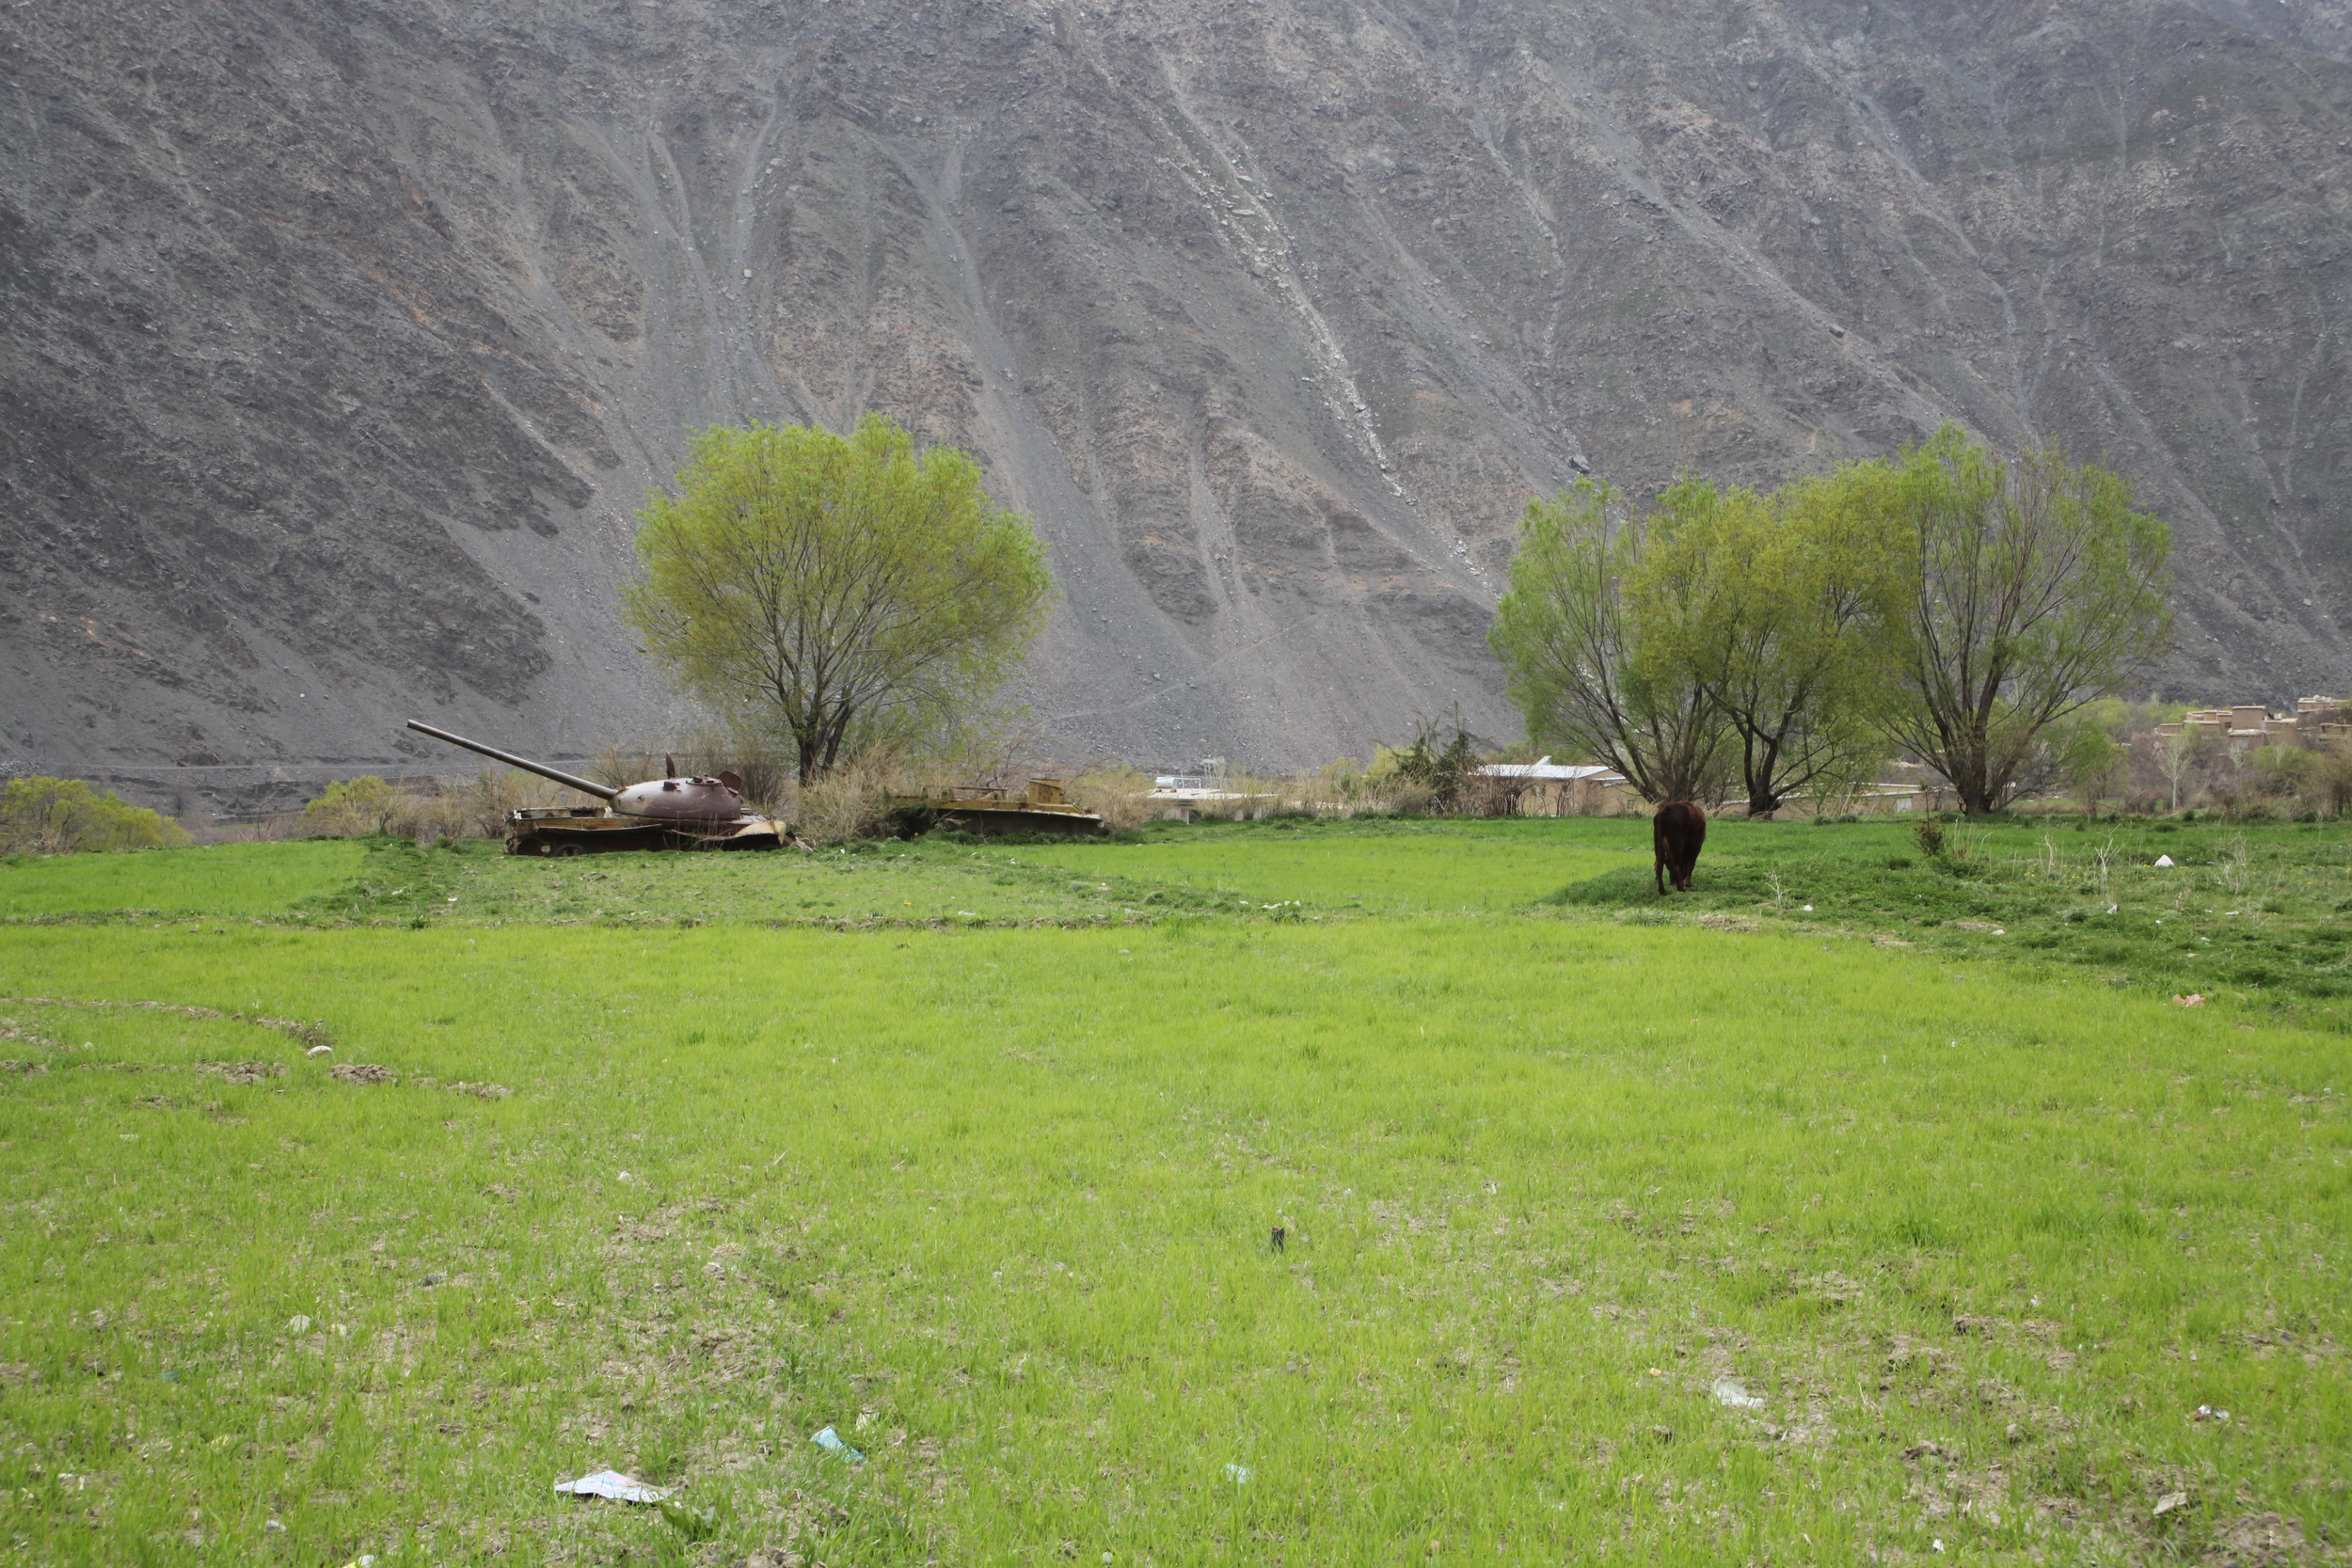   The Panjshir Valley is 150km north of Kabul in Panjshir Provence. The terrain is so rugged that armies from the British to the Soviets suffered heavy casualties when trying to engage various factions and iterations of Afghan fighters. Most recently